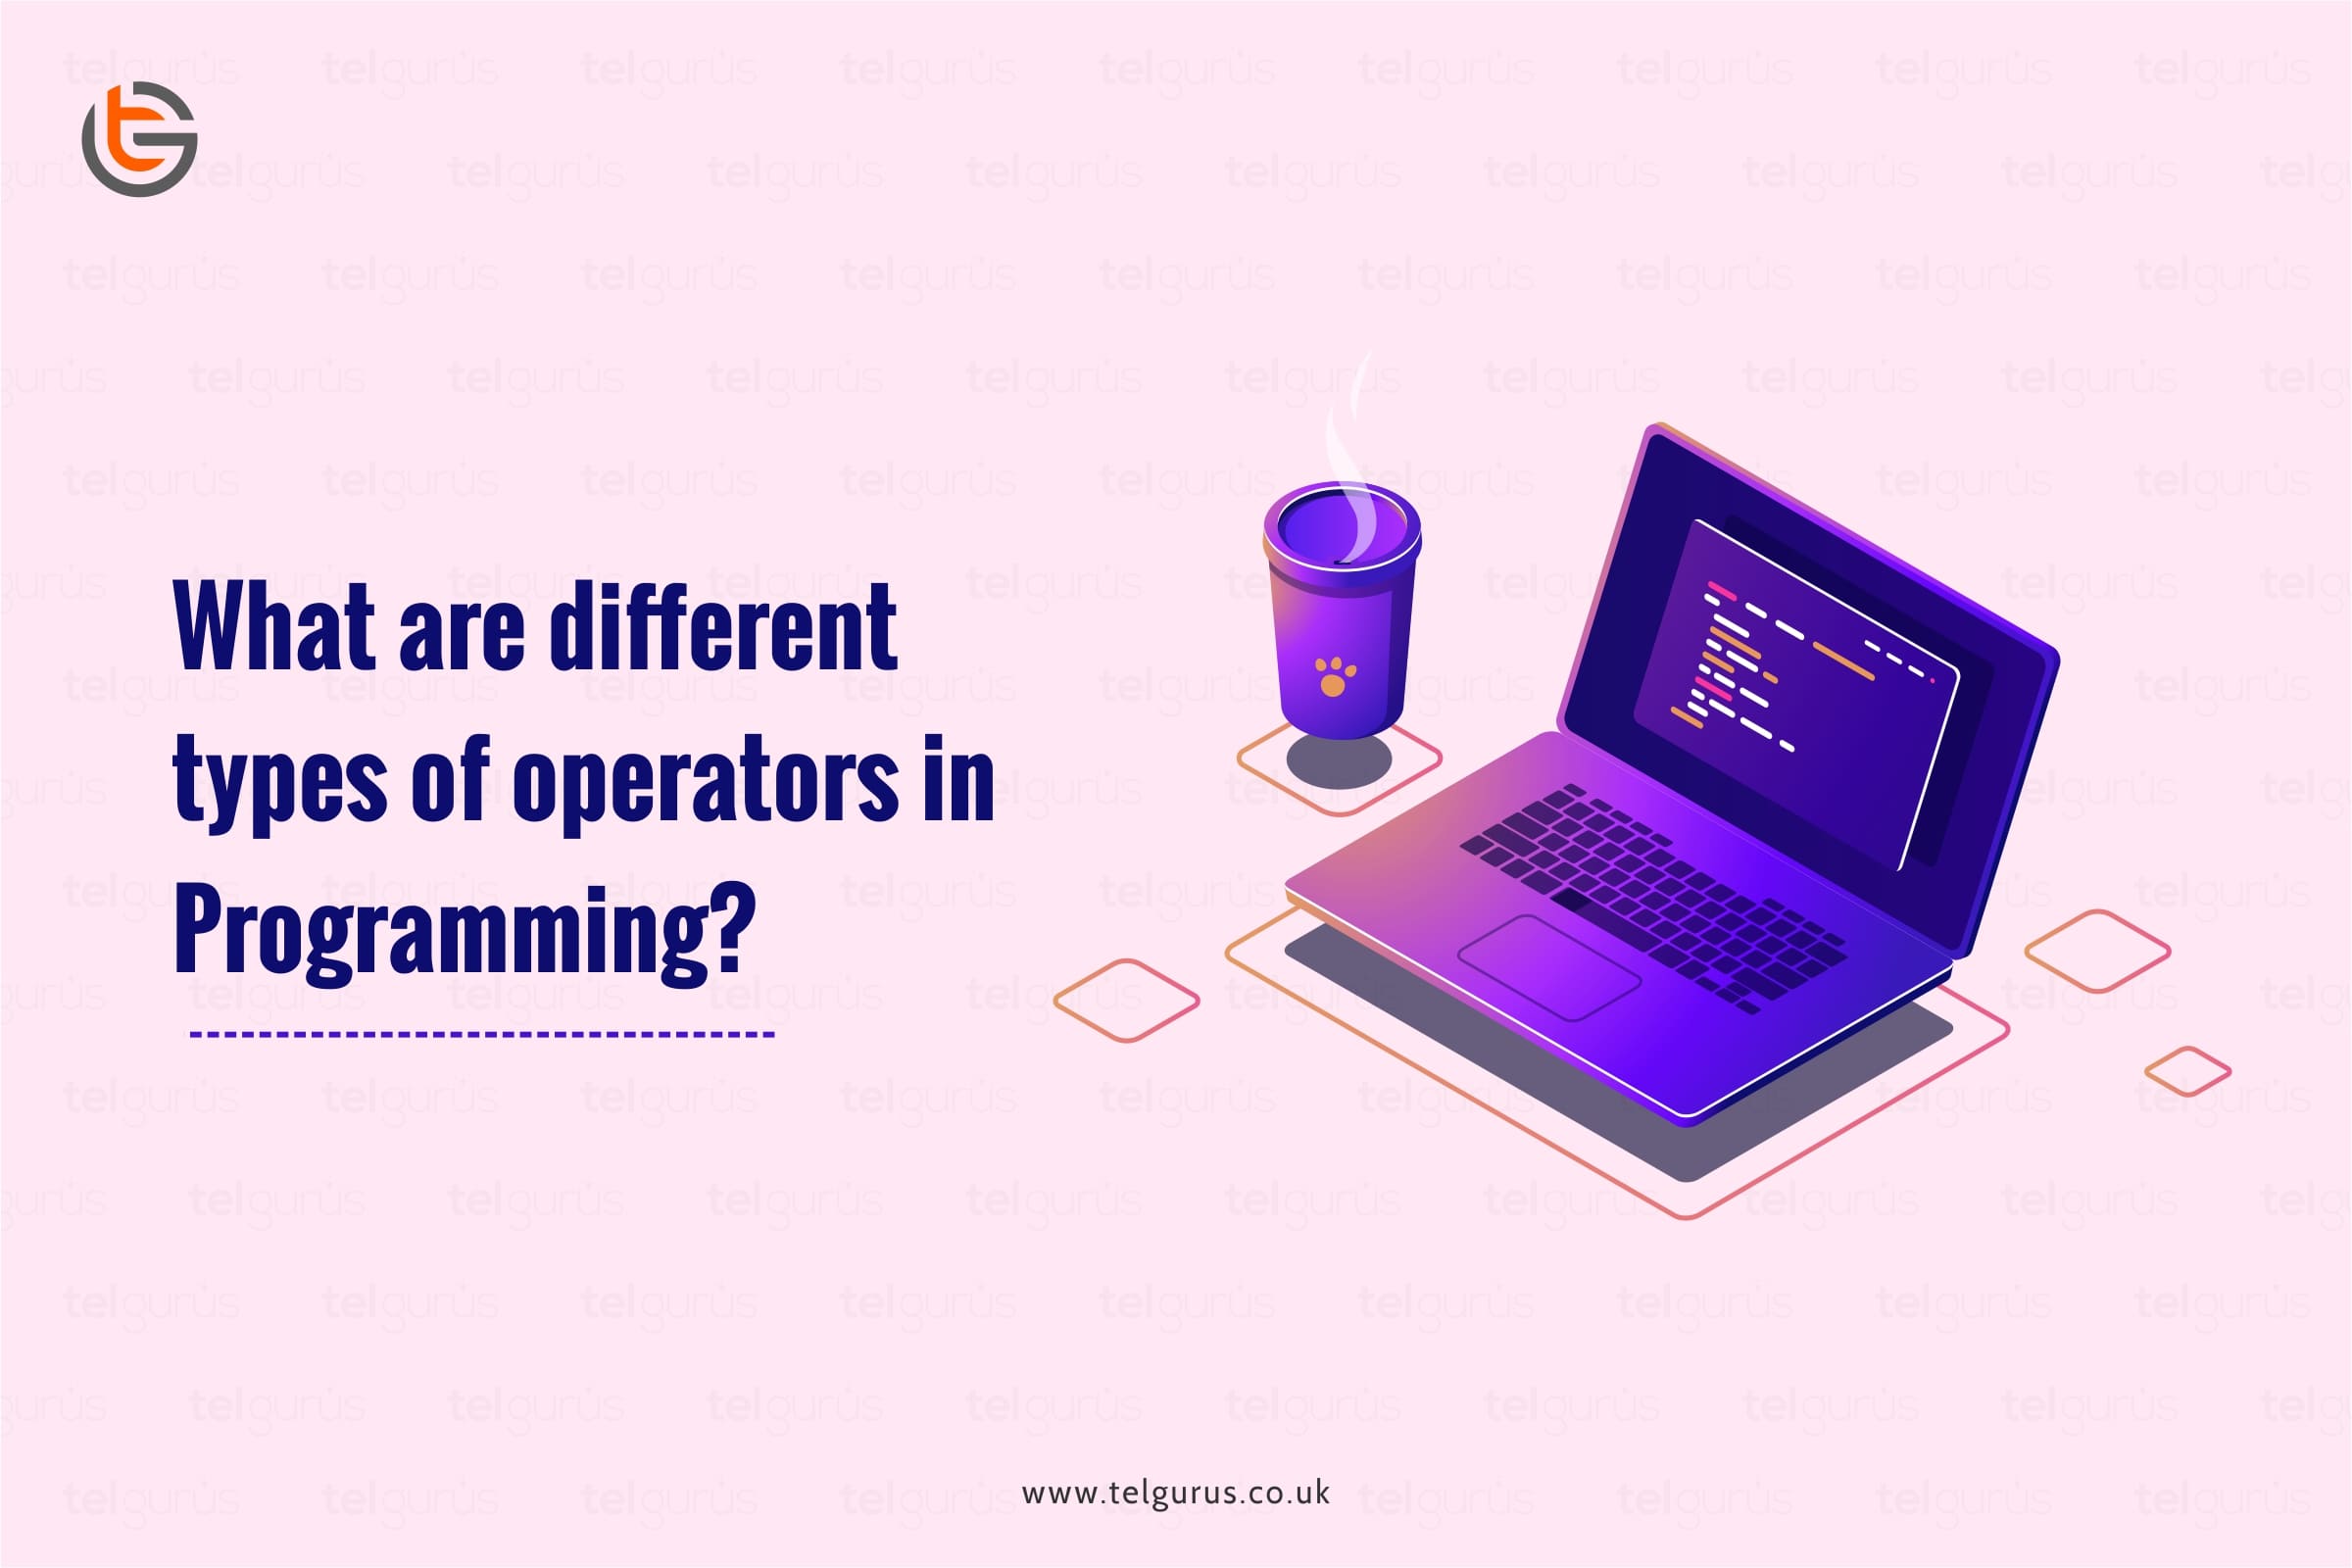 What are different types of operators in Programming?